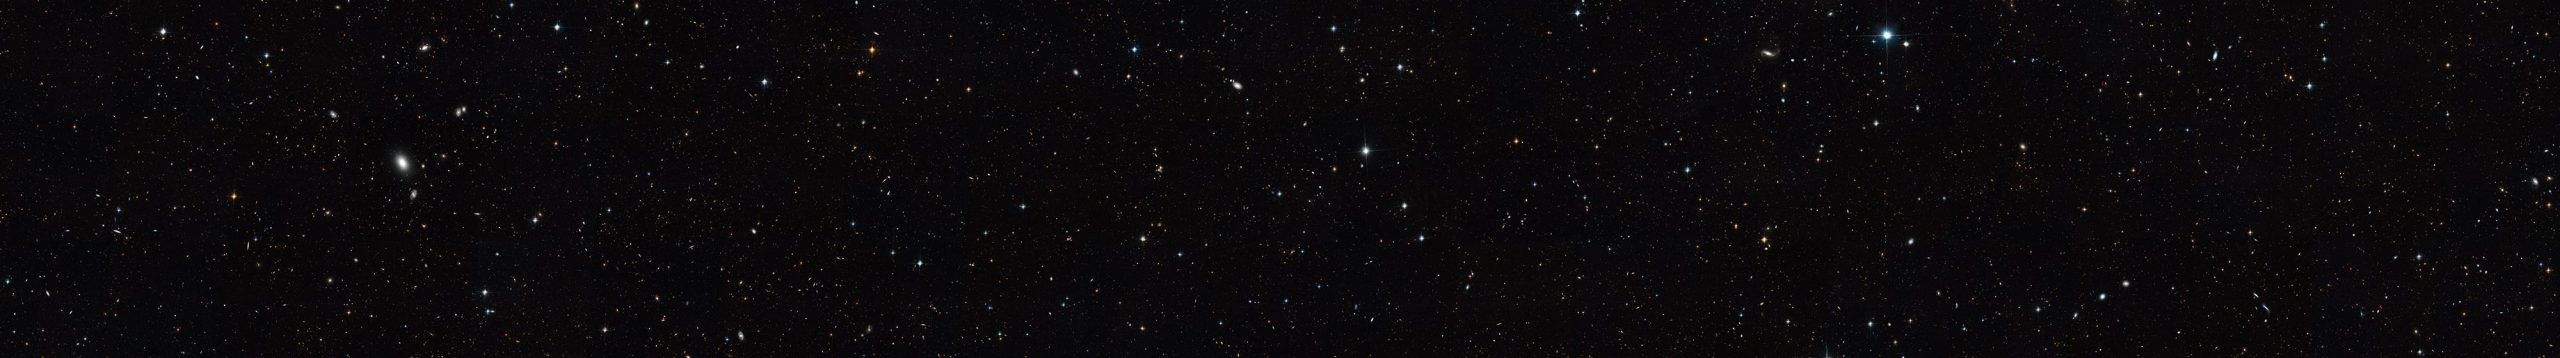 Extended-Groth-Strip-Hubble-scaled.jpg